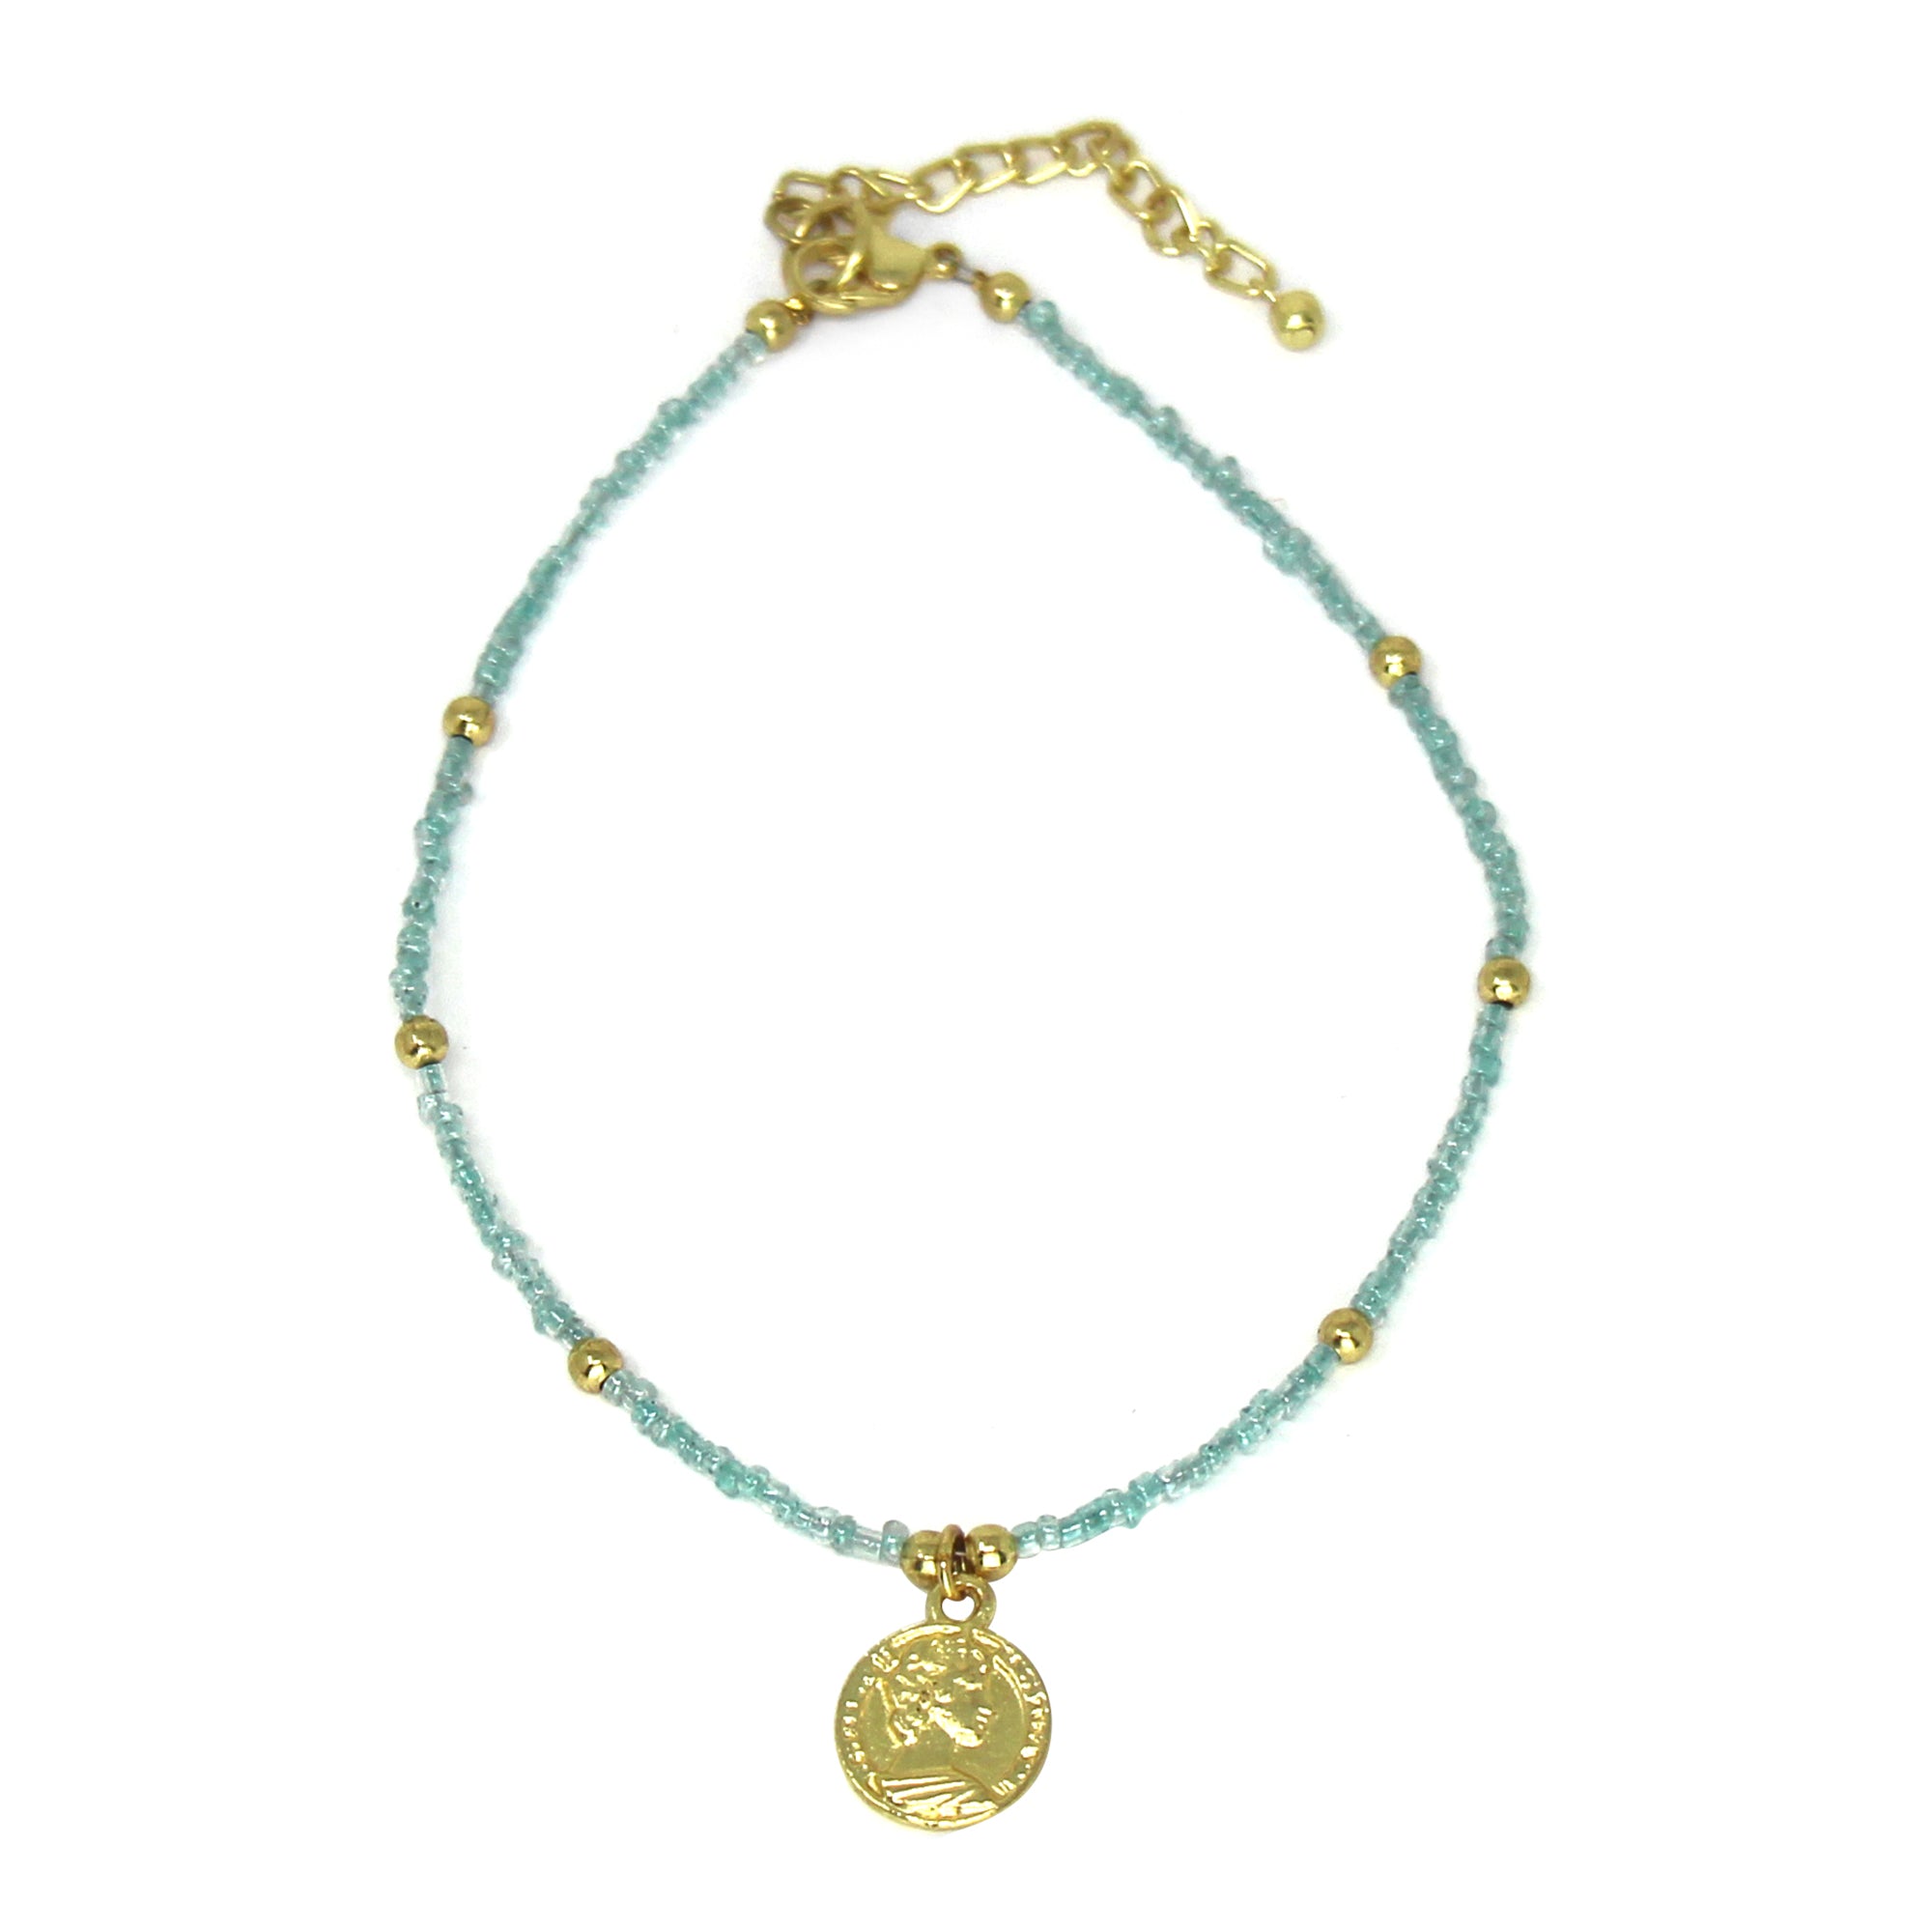 Baby blue Glass Bead Choker with Brass Coin Pendant